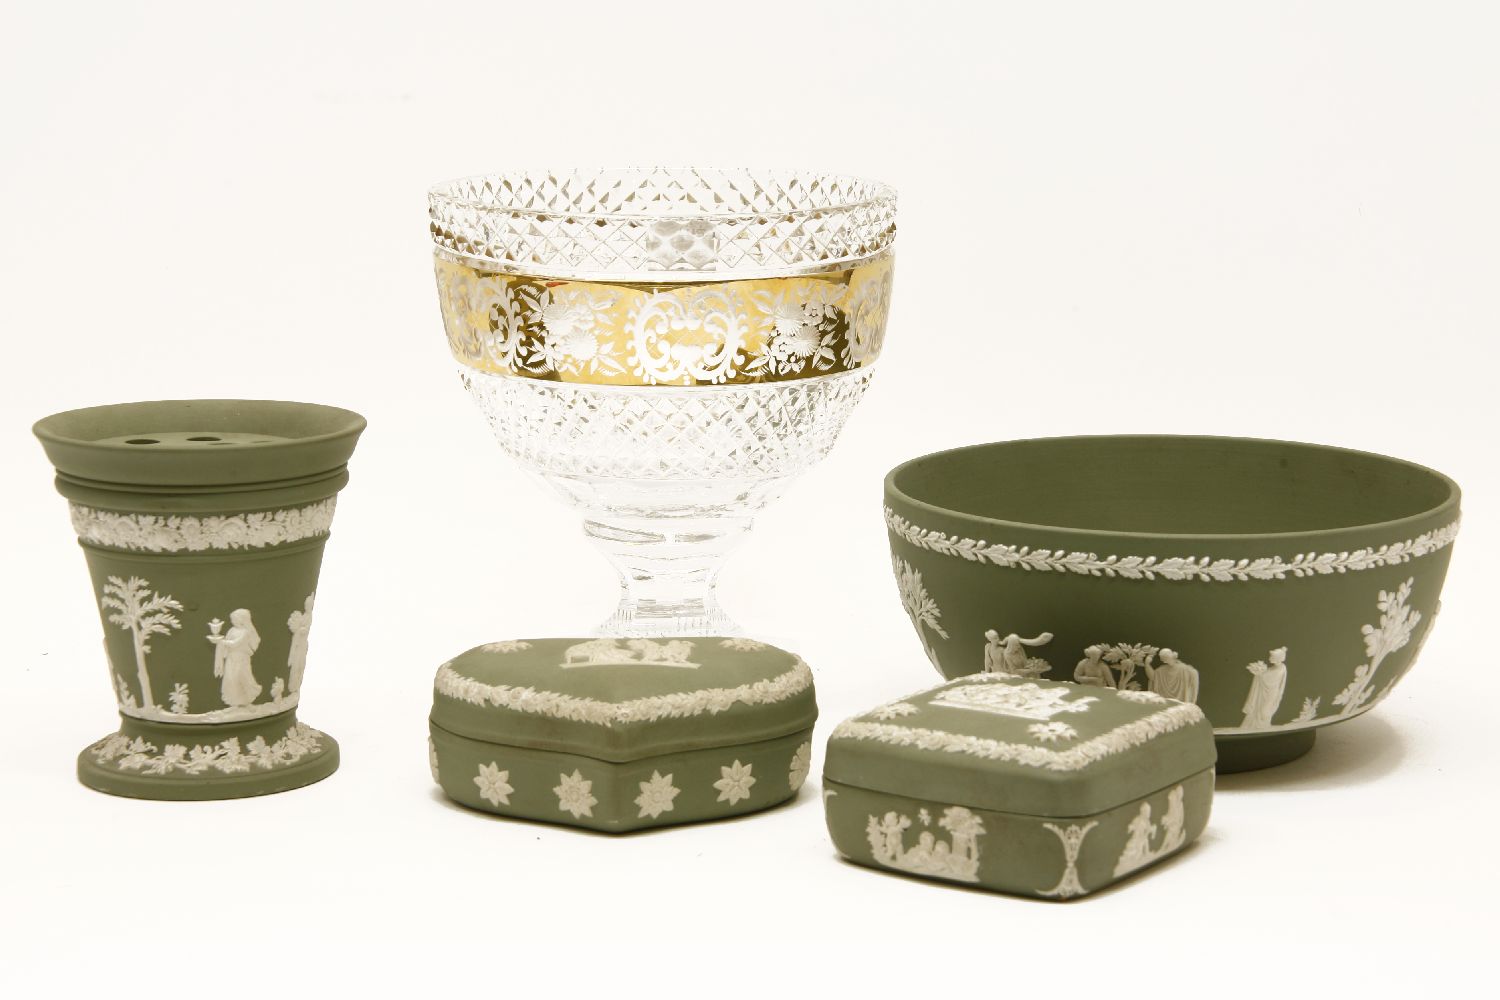 A collection of Wedgwood sage green jasperware, to include a footed bowl, vase, and two trinket